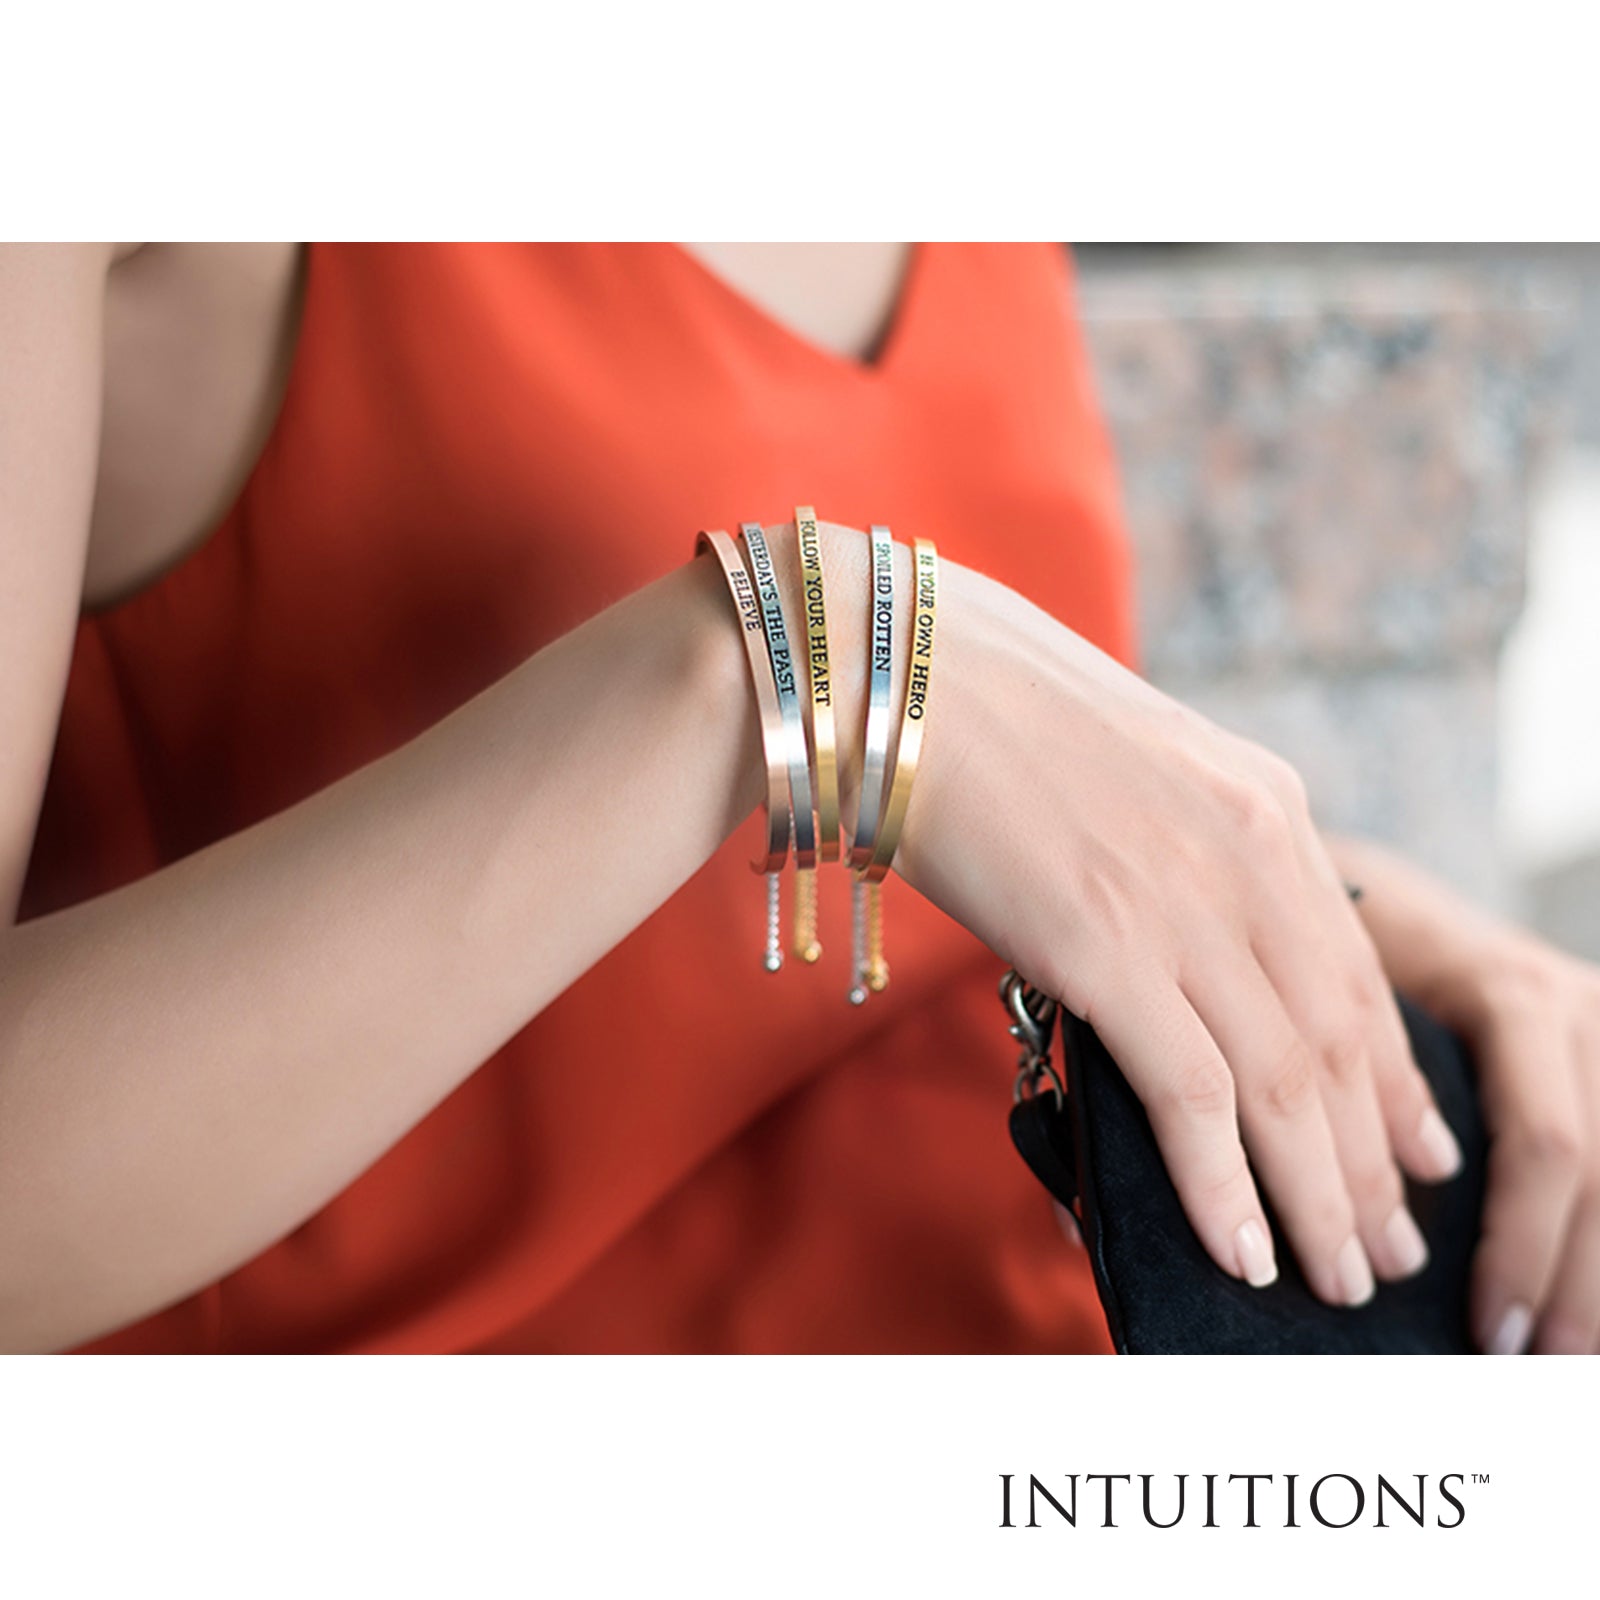 Intuitions Stainless Steel THINK POSITIVE Diamond Accent Cuff Bangle Bracelet fine designer jewelry for men and women